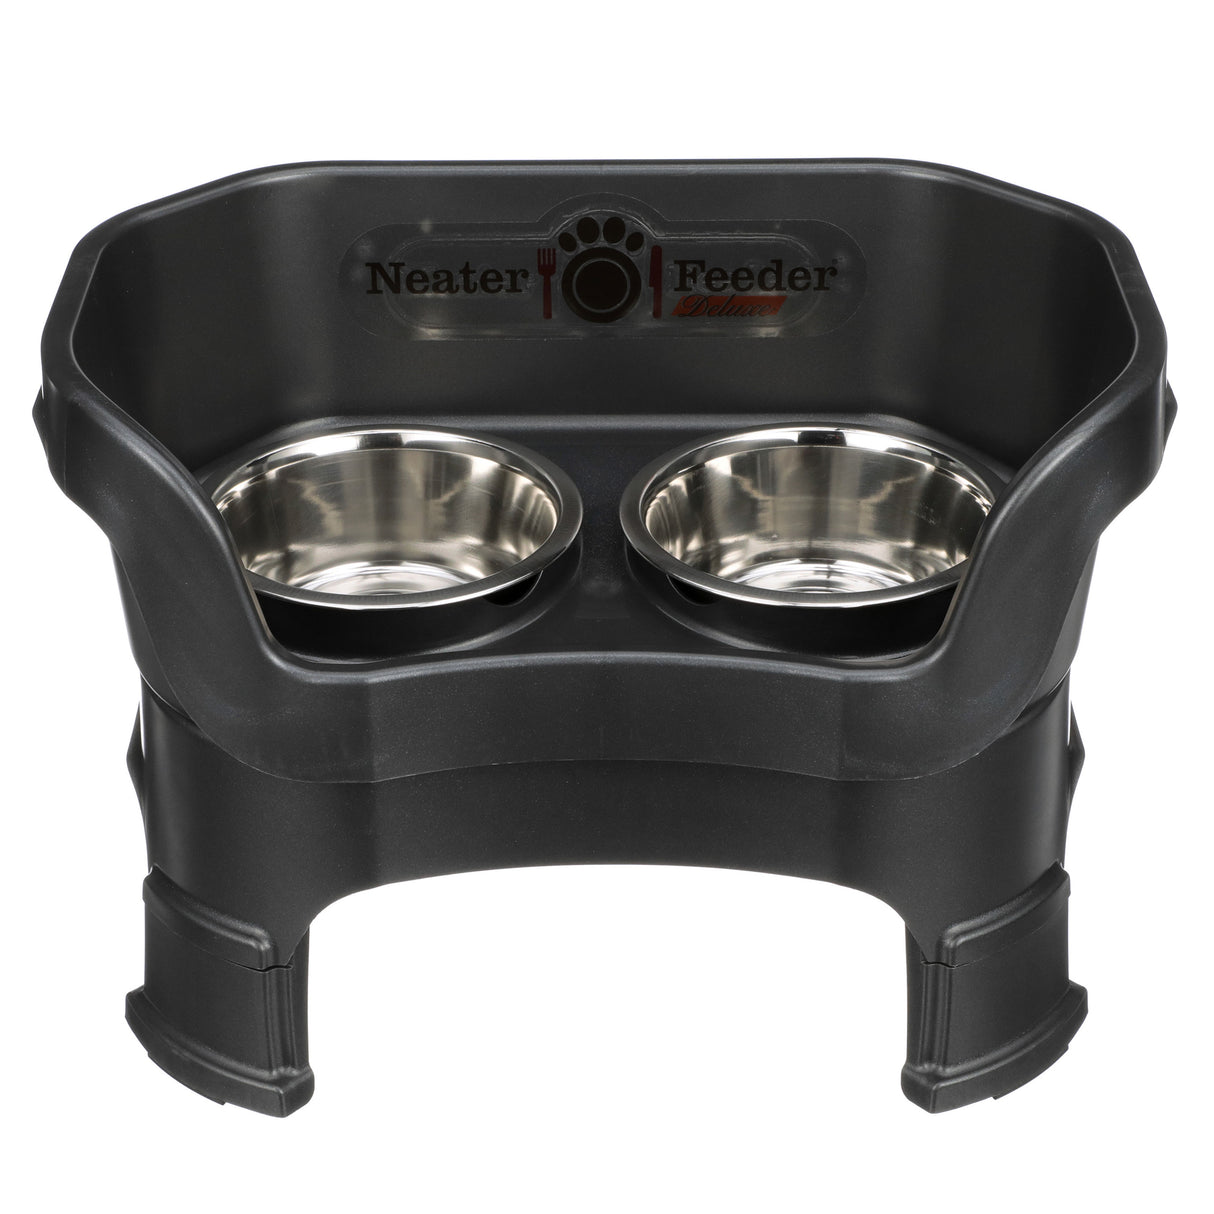 Deluxe medium Neater Feeder in Midnight Black with leg extensions